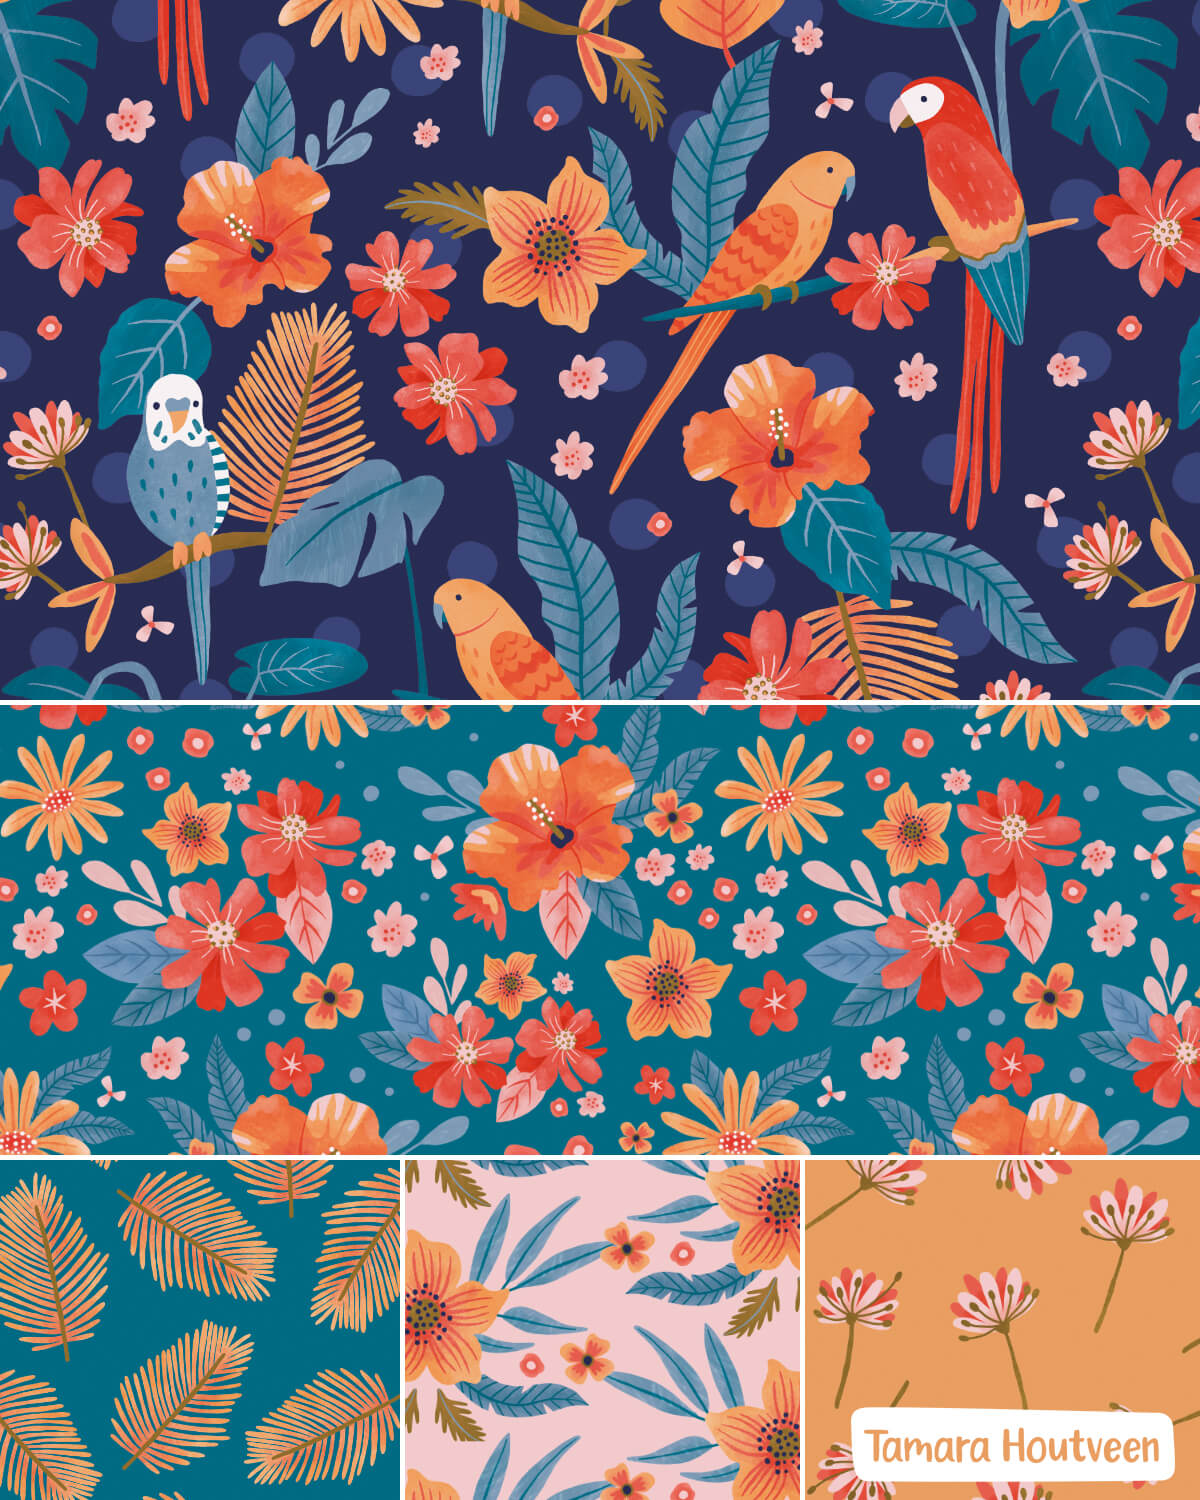 Overview of the tropical birds and flowers surface pattern collection by Tamara Houtveen